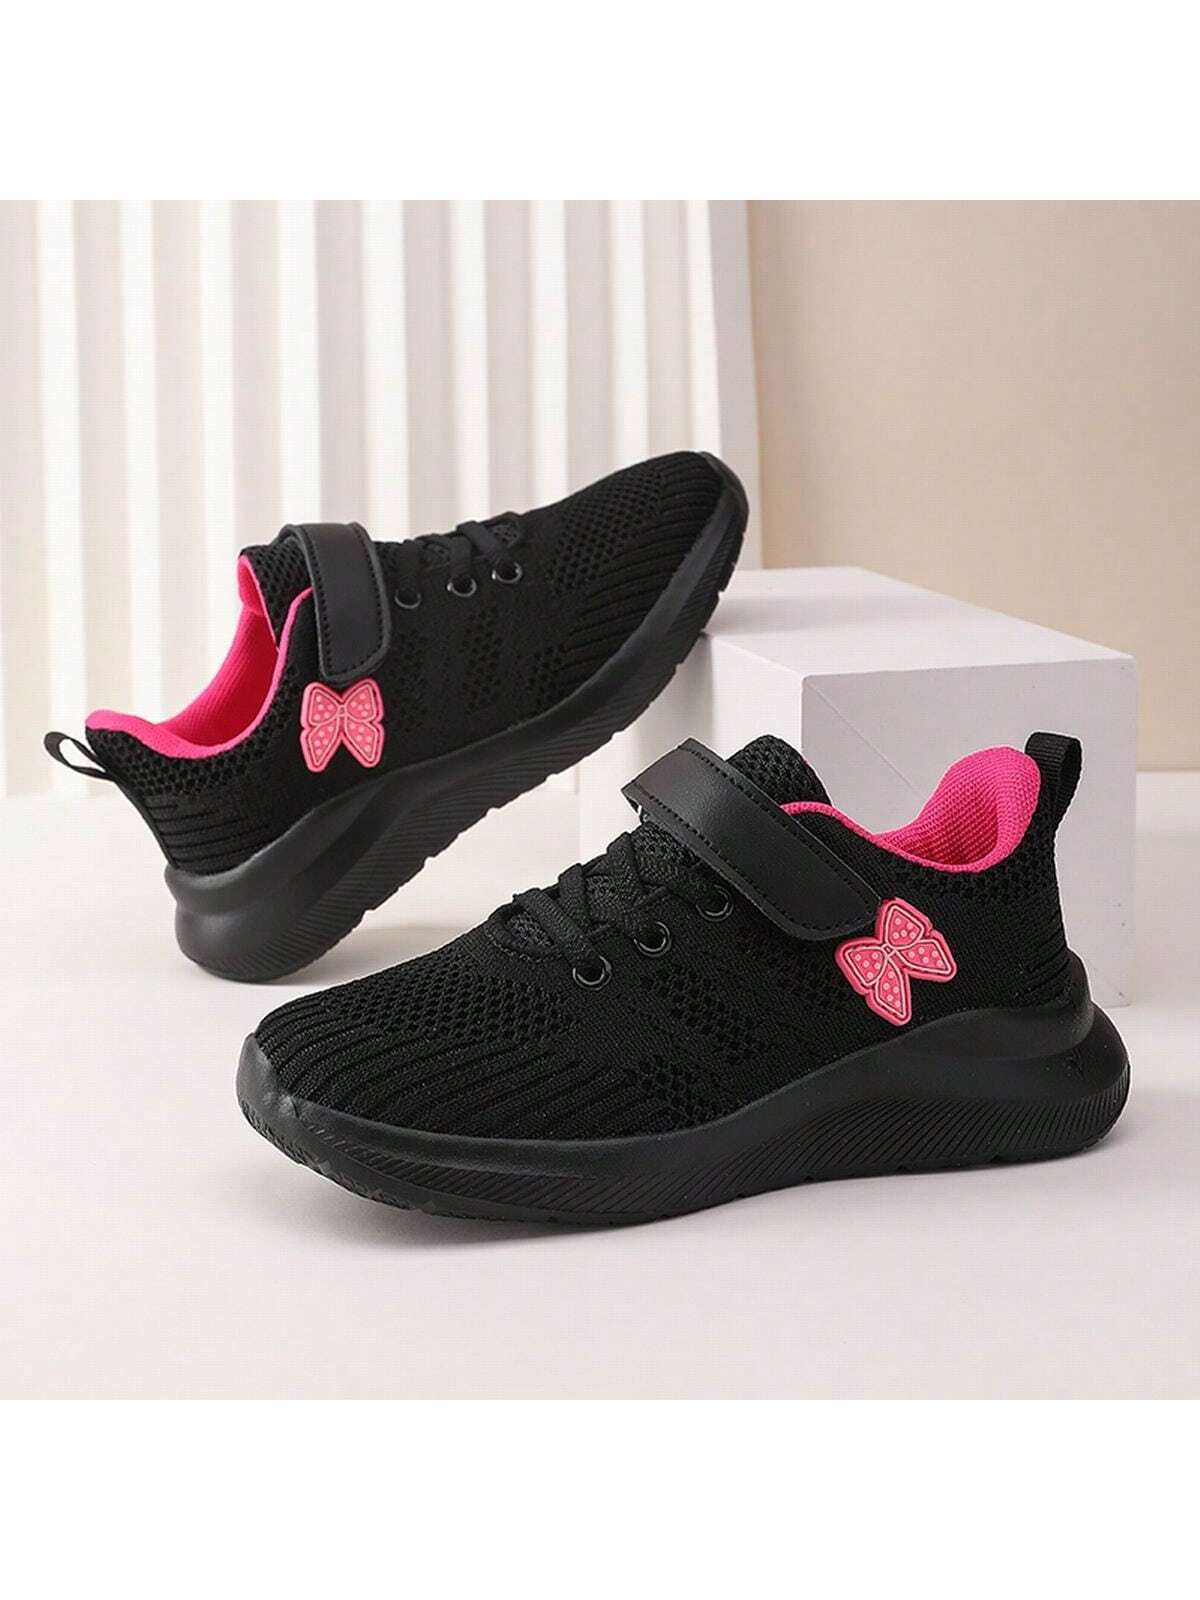 1 Pair Lightweight & Comfortable Women'S Athletic Shoes, Casual Breathable Mesh Running Shoes, All-Match Summer Sneakers-Black-2